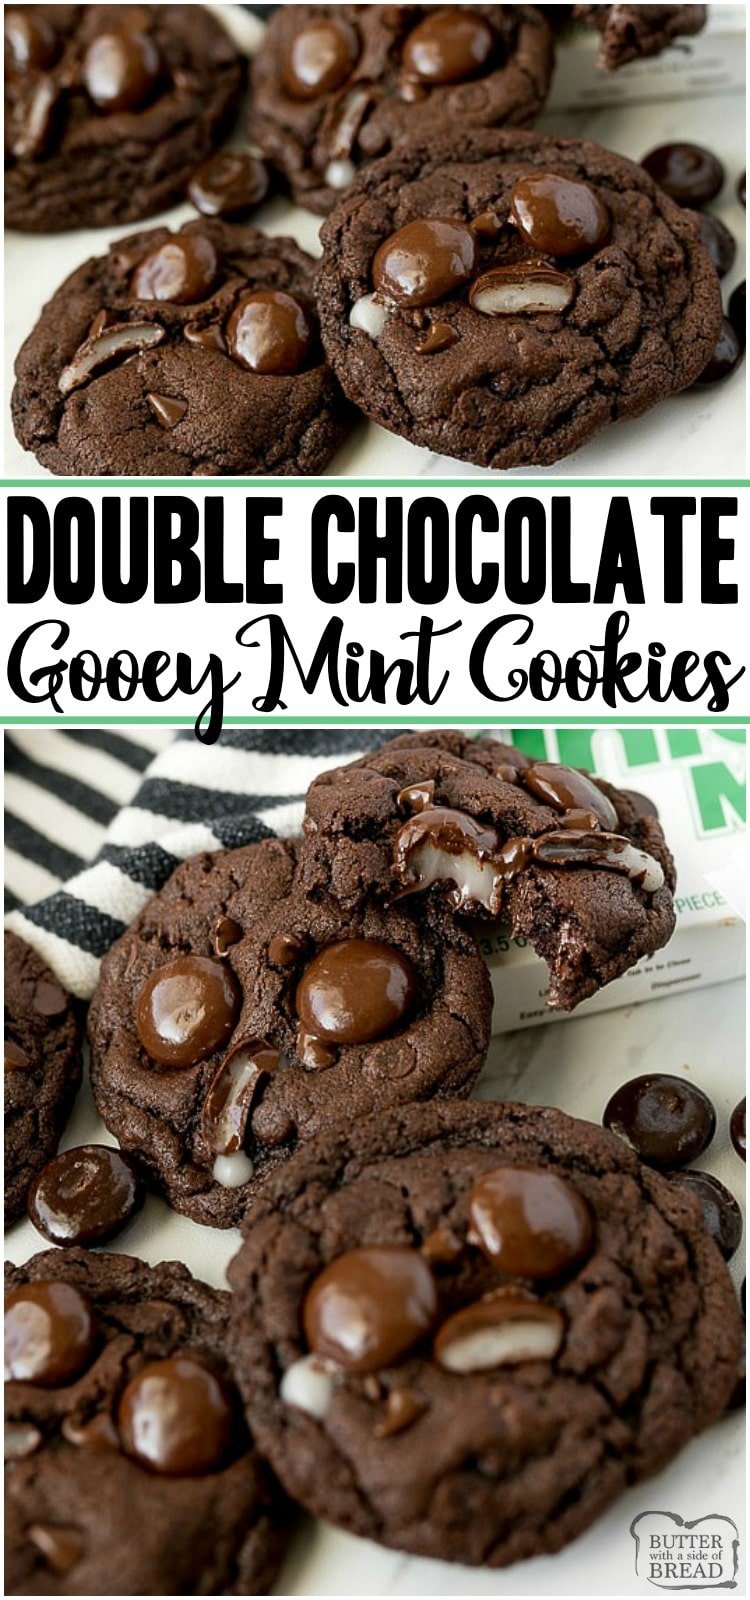 Double Chocolate Mint Cookies are a rich, chewy chocolate cookie topped with Junior Mints! Perfect fudge cookie recipe for mint chocolate lovers.  #cookies #mint #chocolate #baking #dessert #chocolatecookies #cookierecipe from BUTTER WITH A SIDE OF BREAD